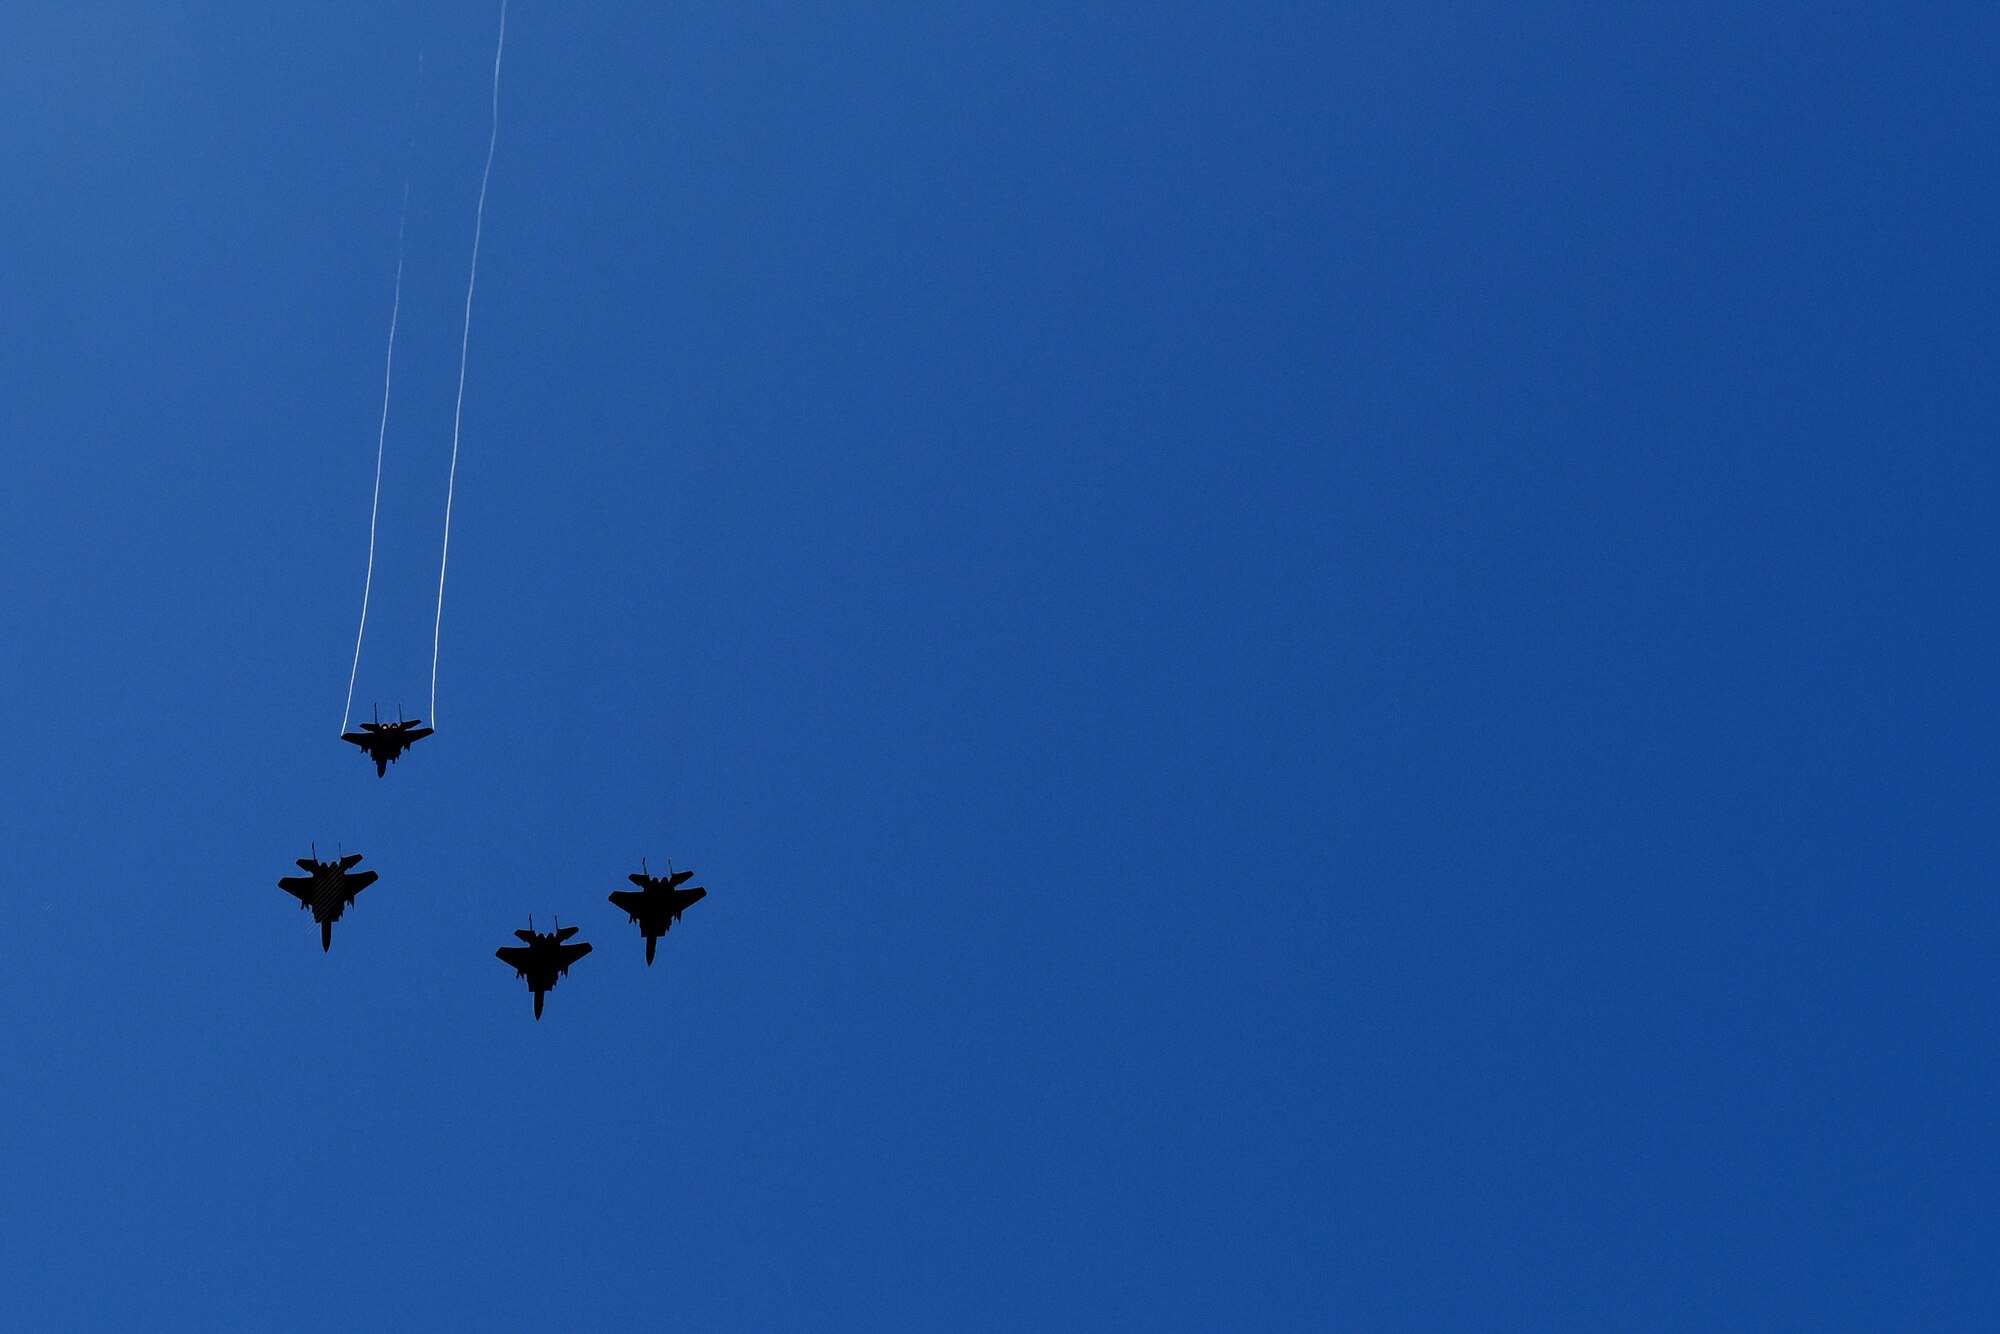 F-15E Strike Eagles perform a missing-man formation flyover during the unveiling of a memorial dedicated to the British Royal Air Force Squadron 71 members, July 8, 2016, at Seymour Johnson Air Force Base, North Carolina. Team Seymour members and invited guests from all over the country attended the ceremony to honor the No. 71 (Eagle) Squadron members. (U.S. Air Force photo by Airman 1st Class Ashley Williamson)